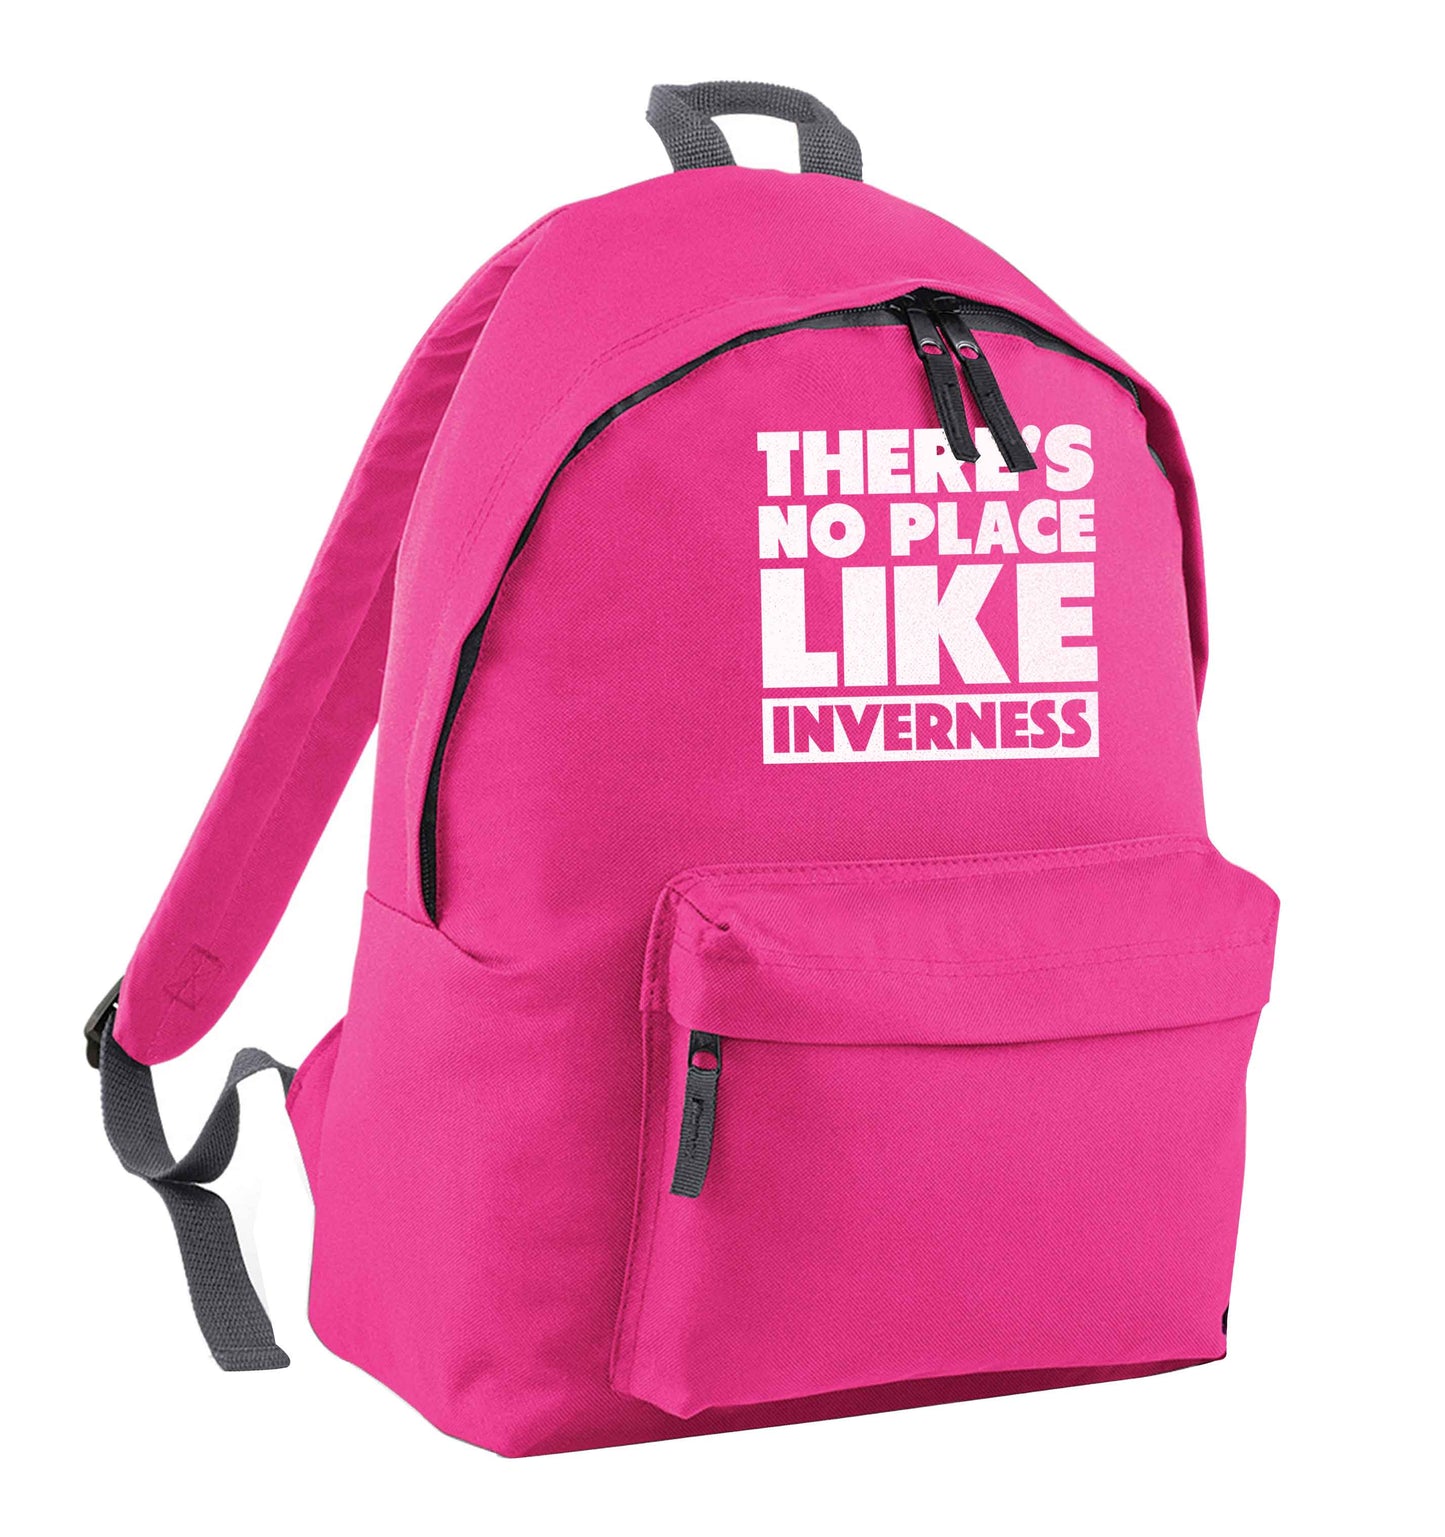 There's no place like Inverness pink adults backpack